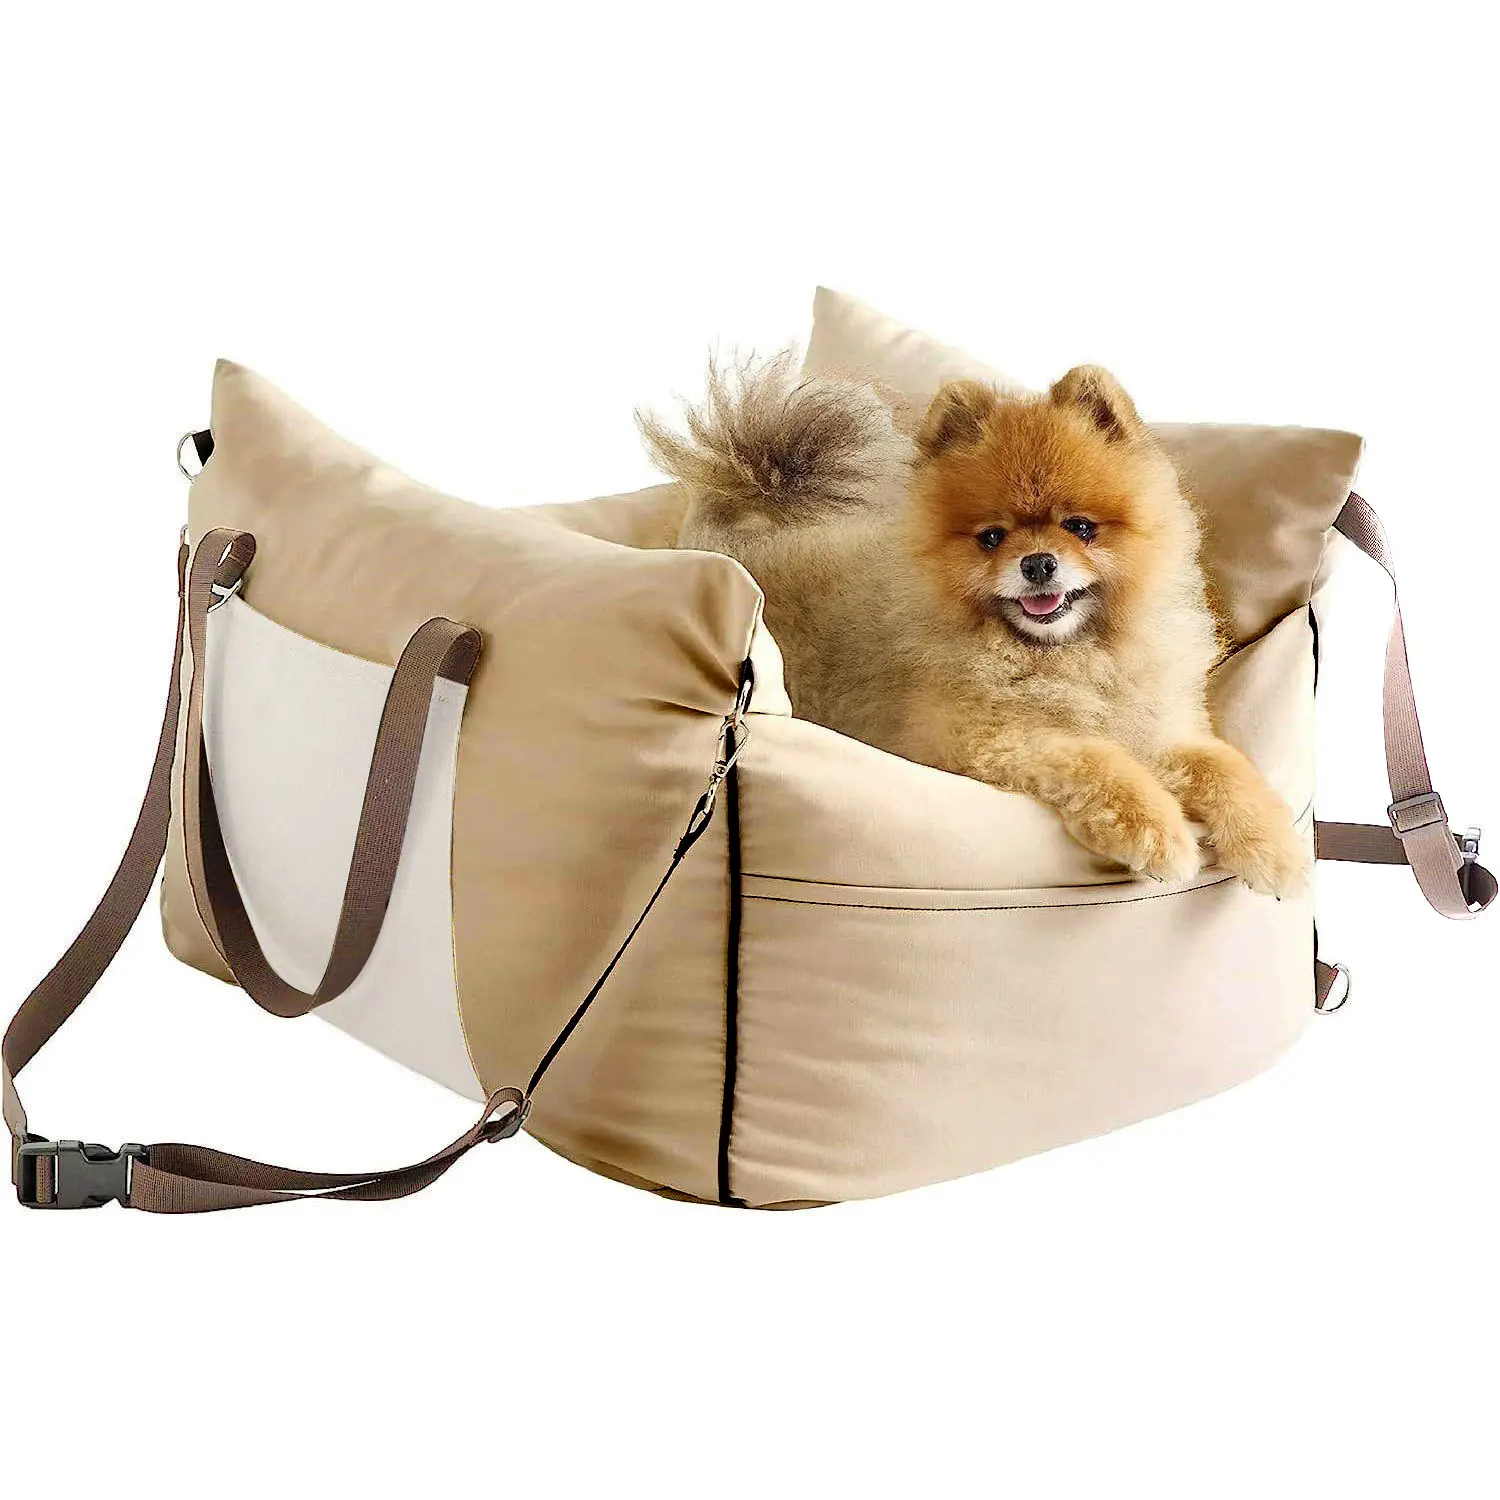 Extravagant Dog Car Seat with Water Resist, Removable and Washable Travel Dog Bed & Pet Carrier with Customized Logo